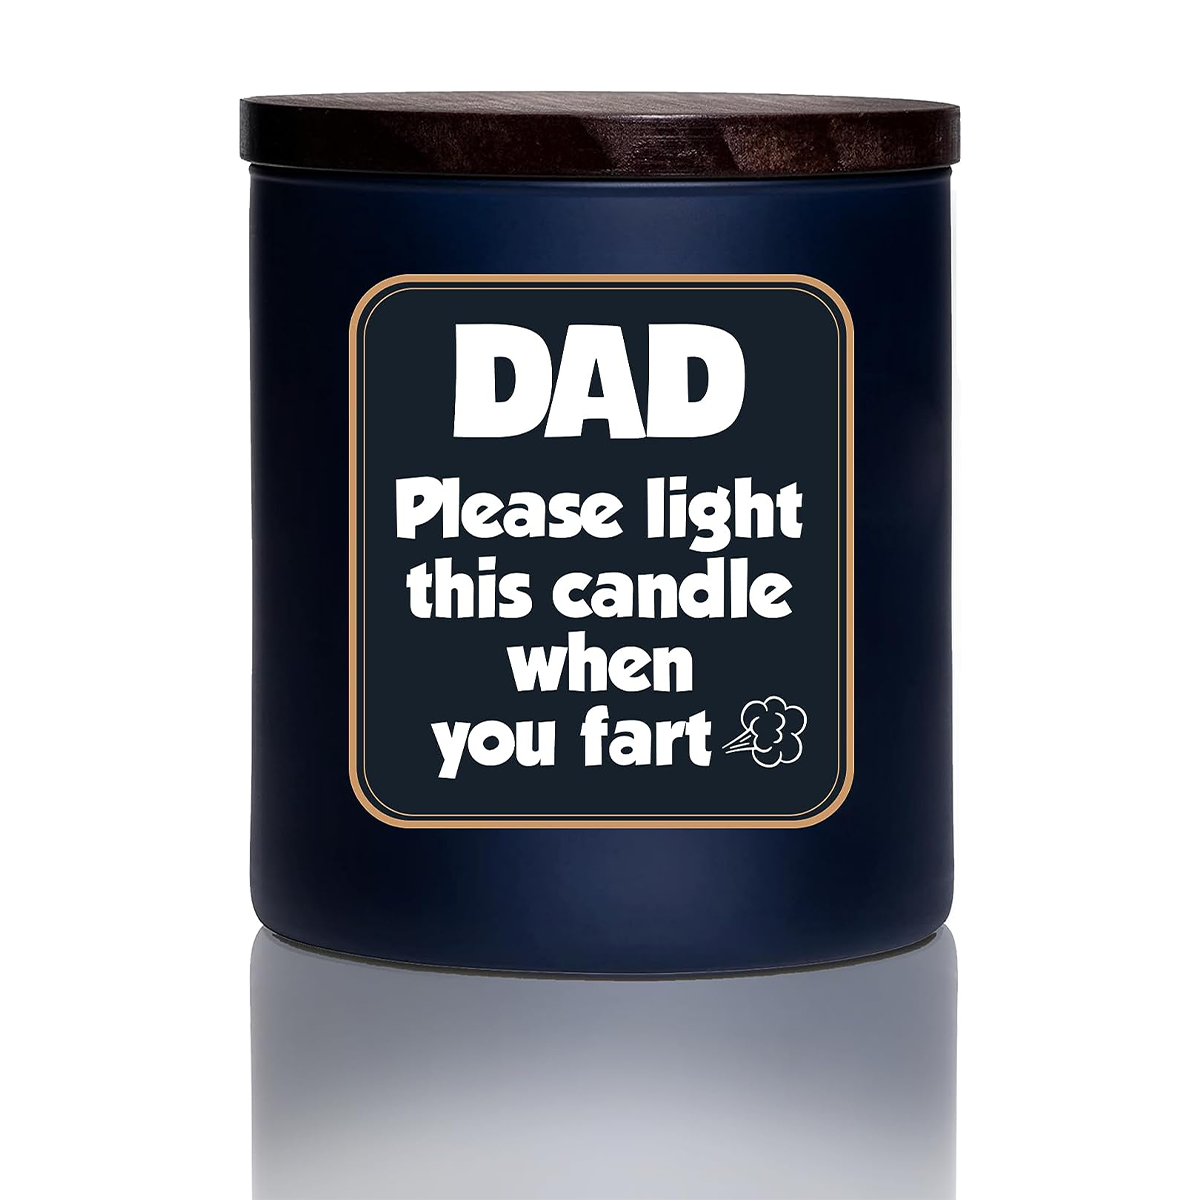 Dad Please Light This Candle - Cedar Candle 8 Oz